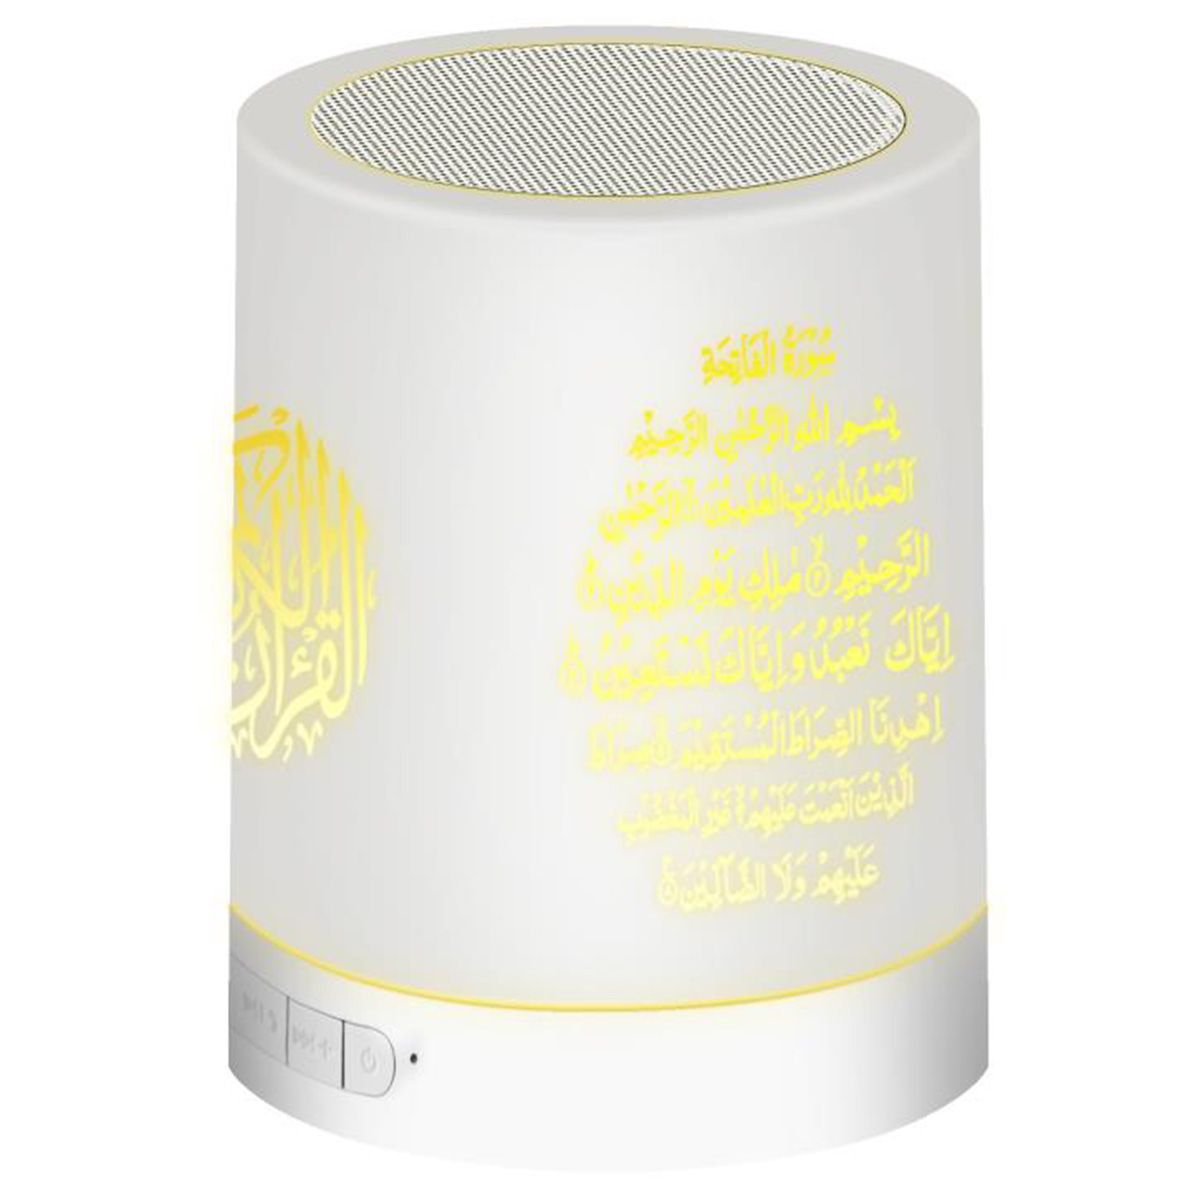 Bakeey-Portable-USB-Charging-Wireless-bluetooth-Colorful-Discoloration-Speaker-Remote-Control-Quran--1650378